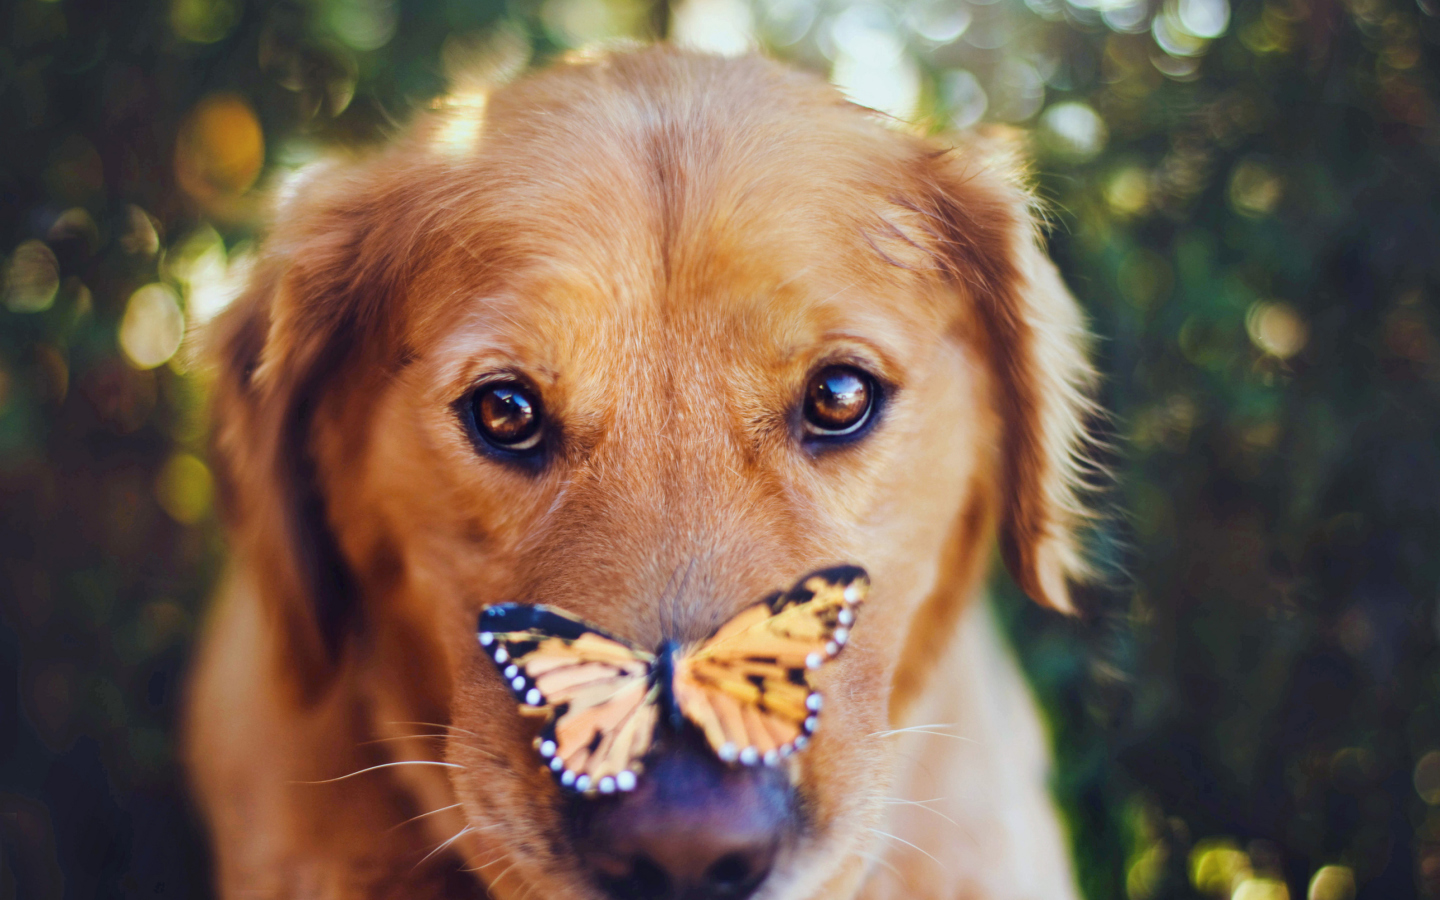 Dog And Butterfly wallpaper 1440x900